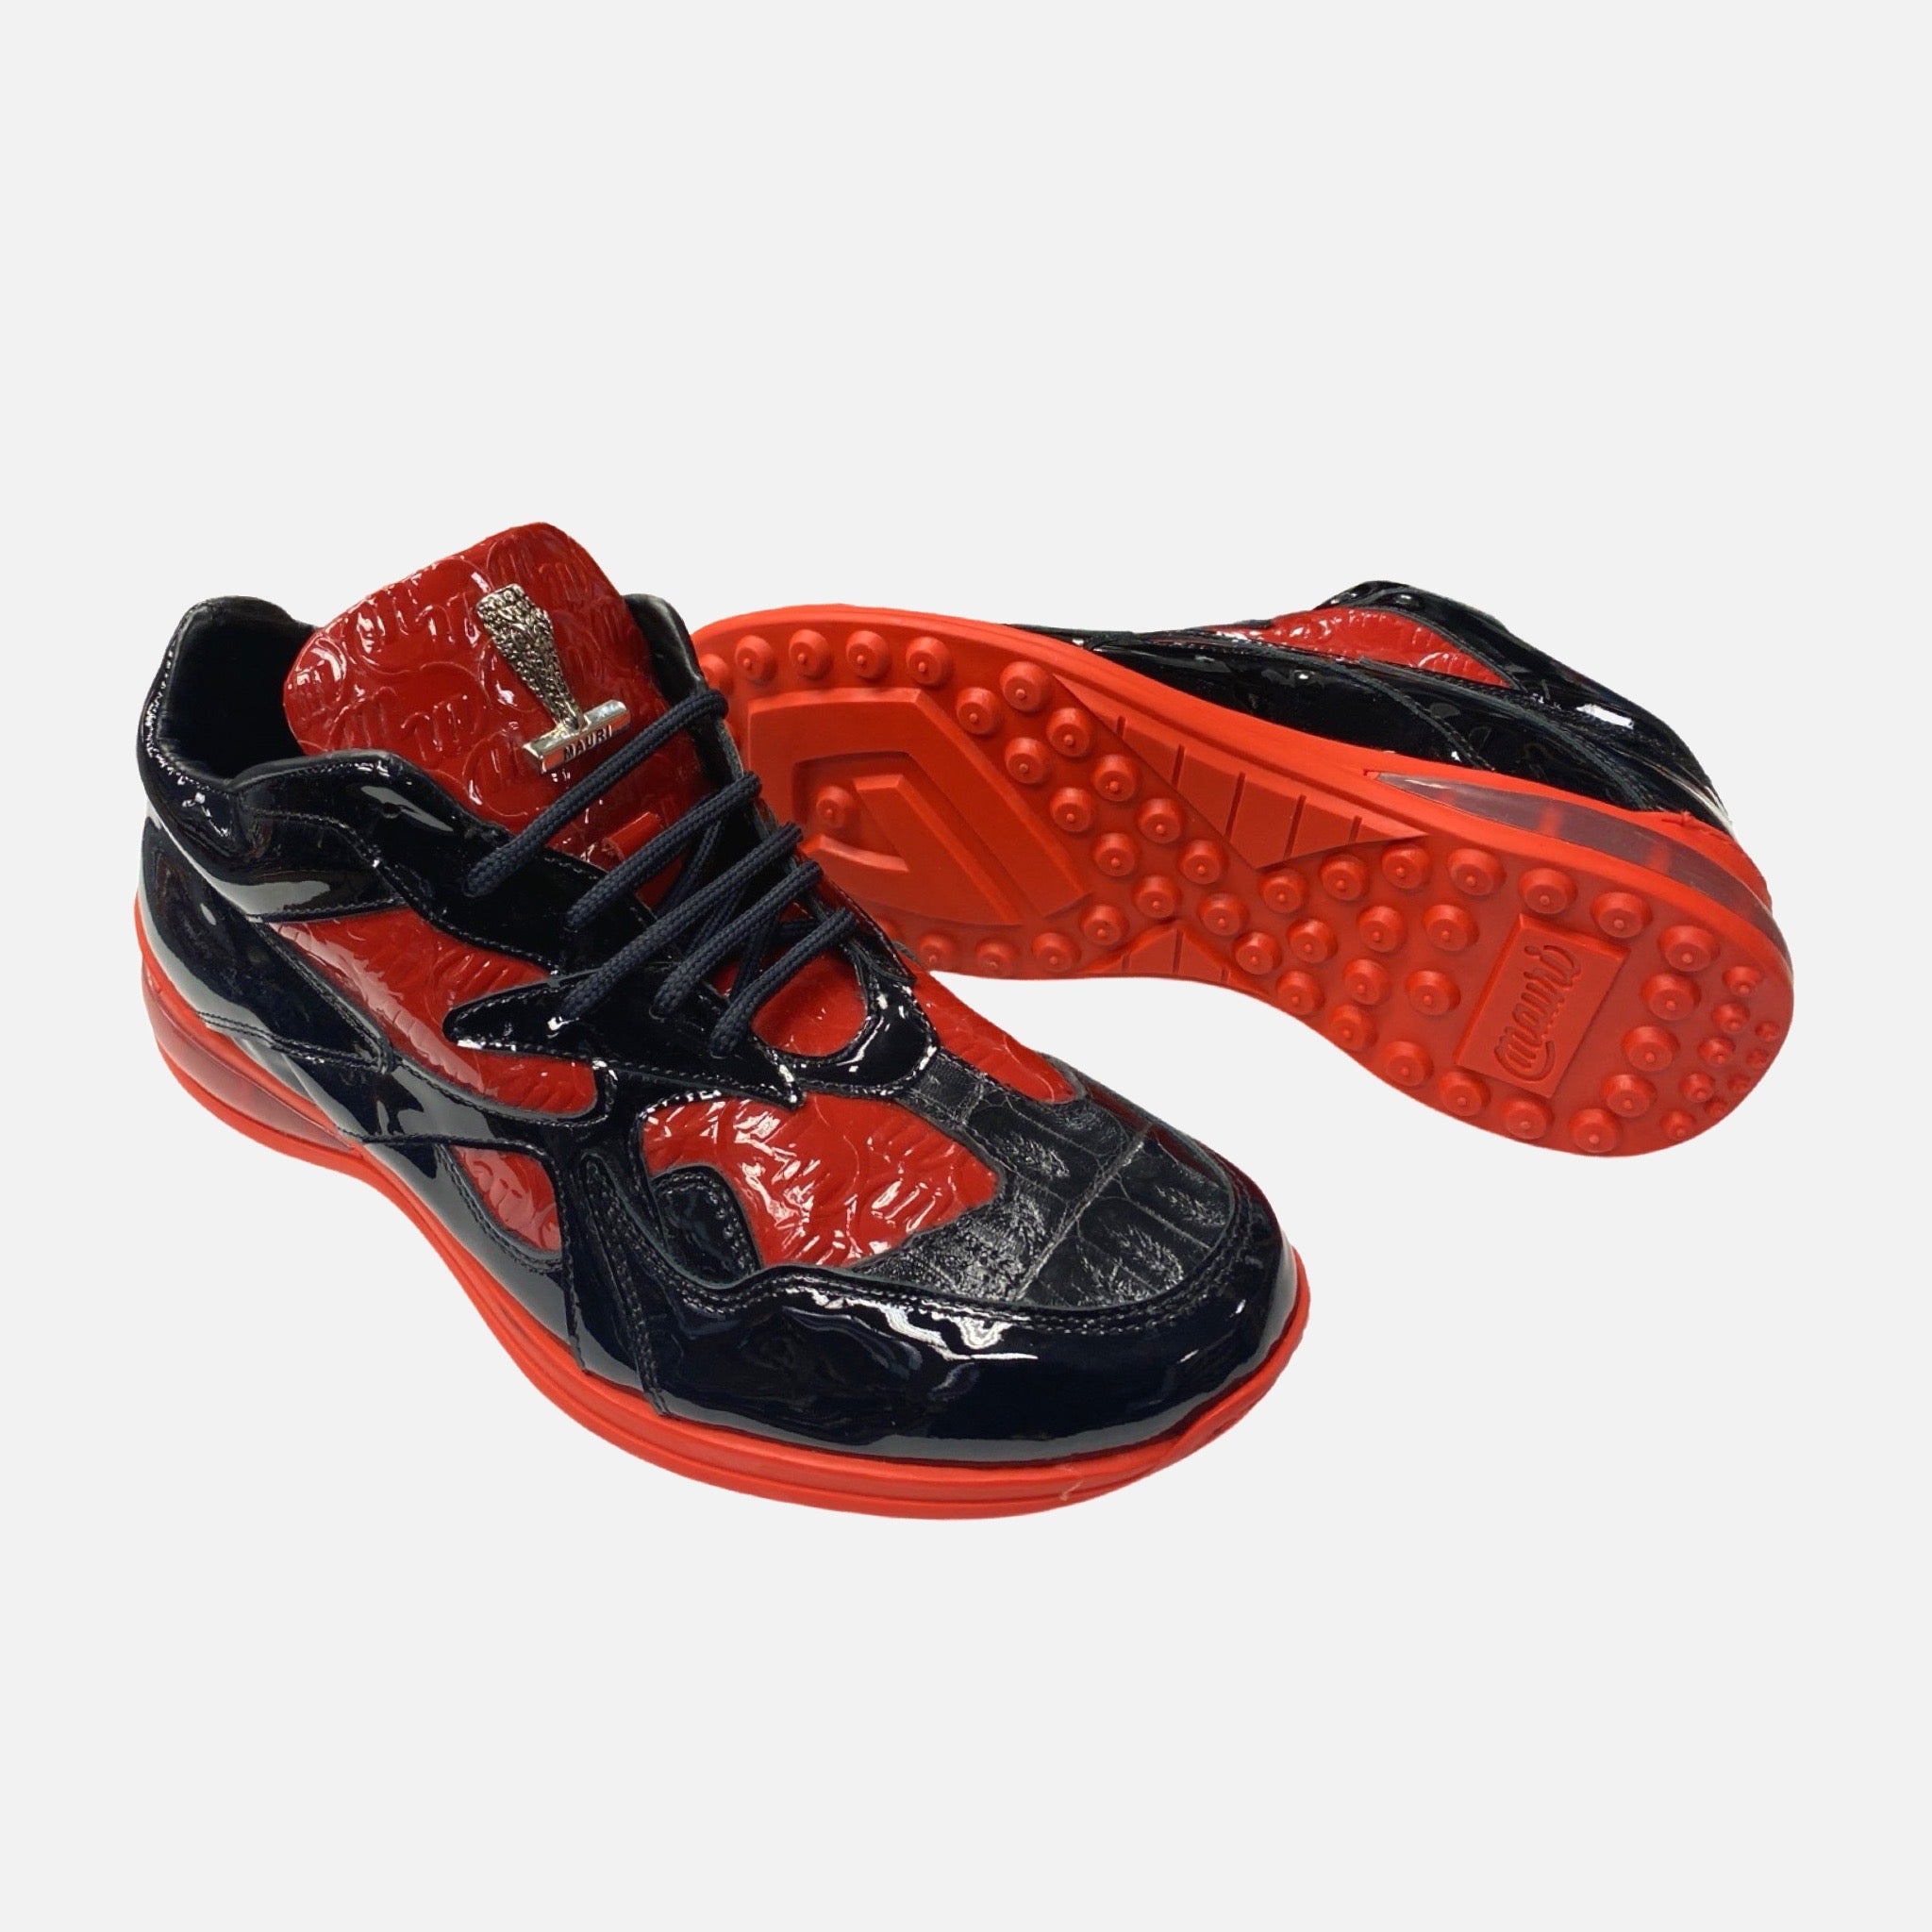 Mauri Black/red sneaker baby croc and patent leather